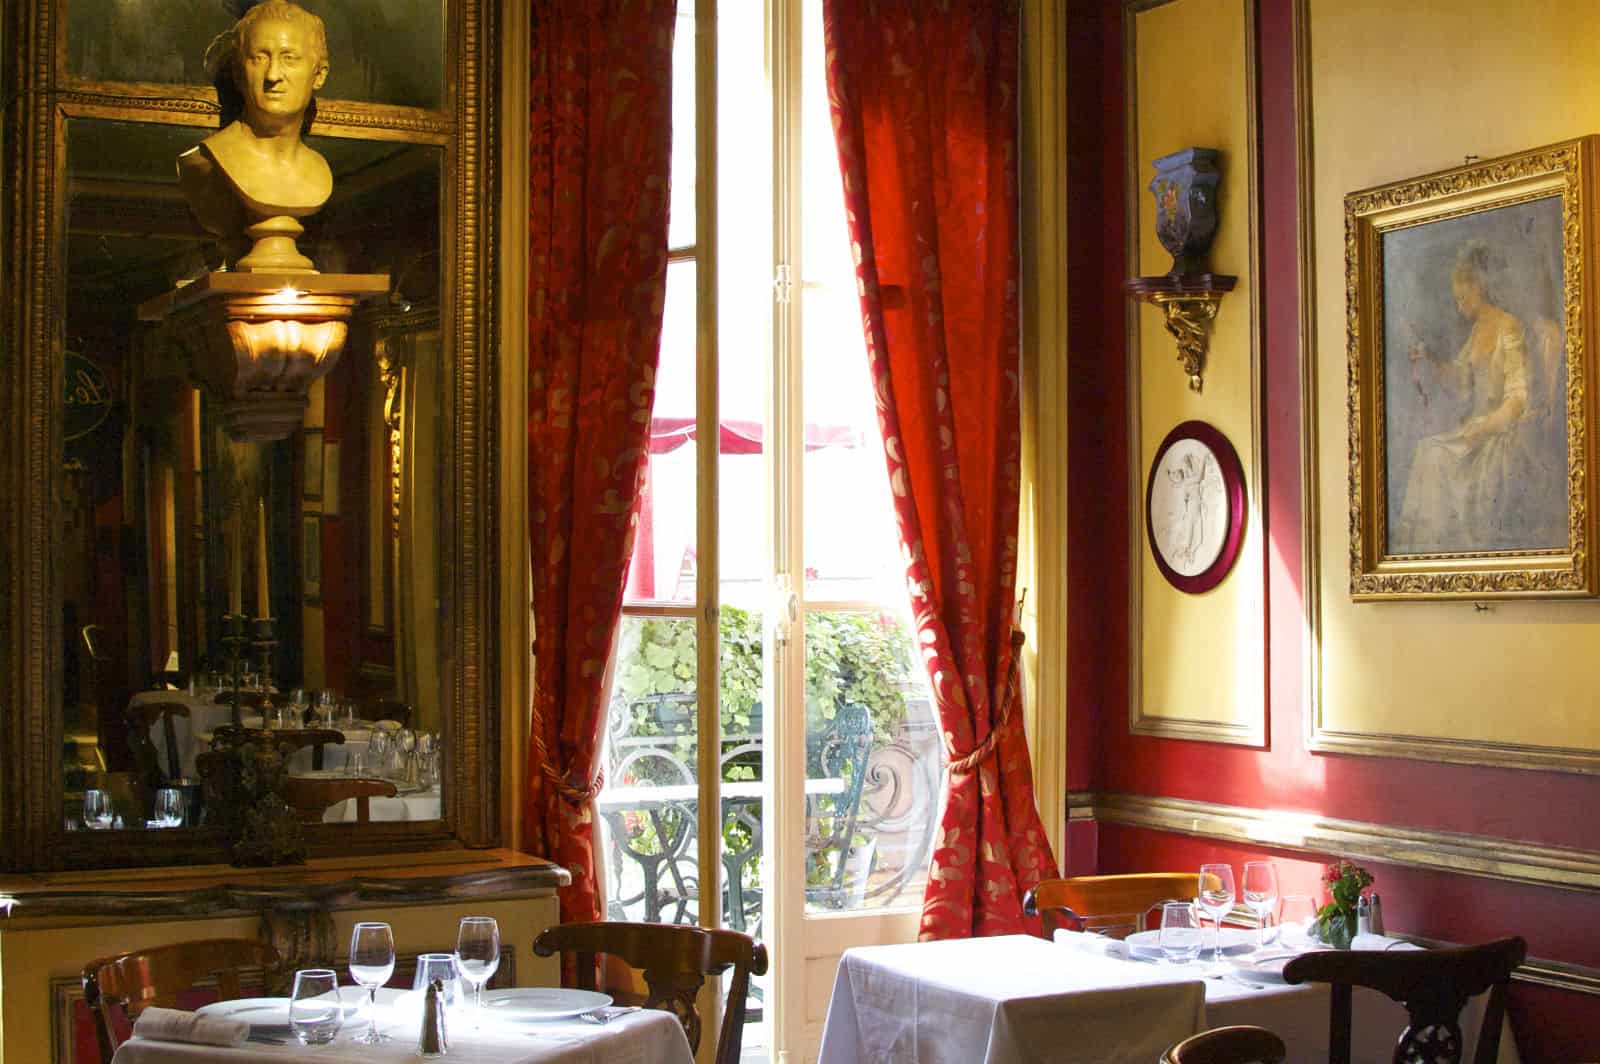 HiP Paris blog. A Paris dining experience with a side of French history at Le Procope. Look out the window on Paris of the present from Paris of the past.